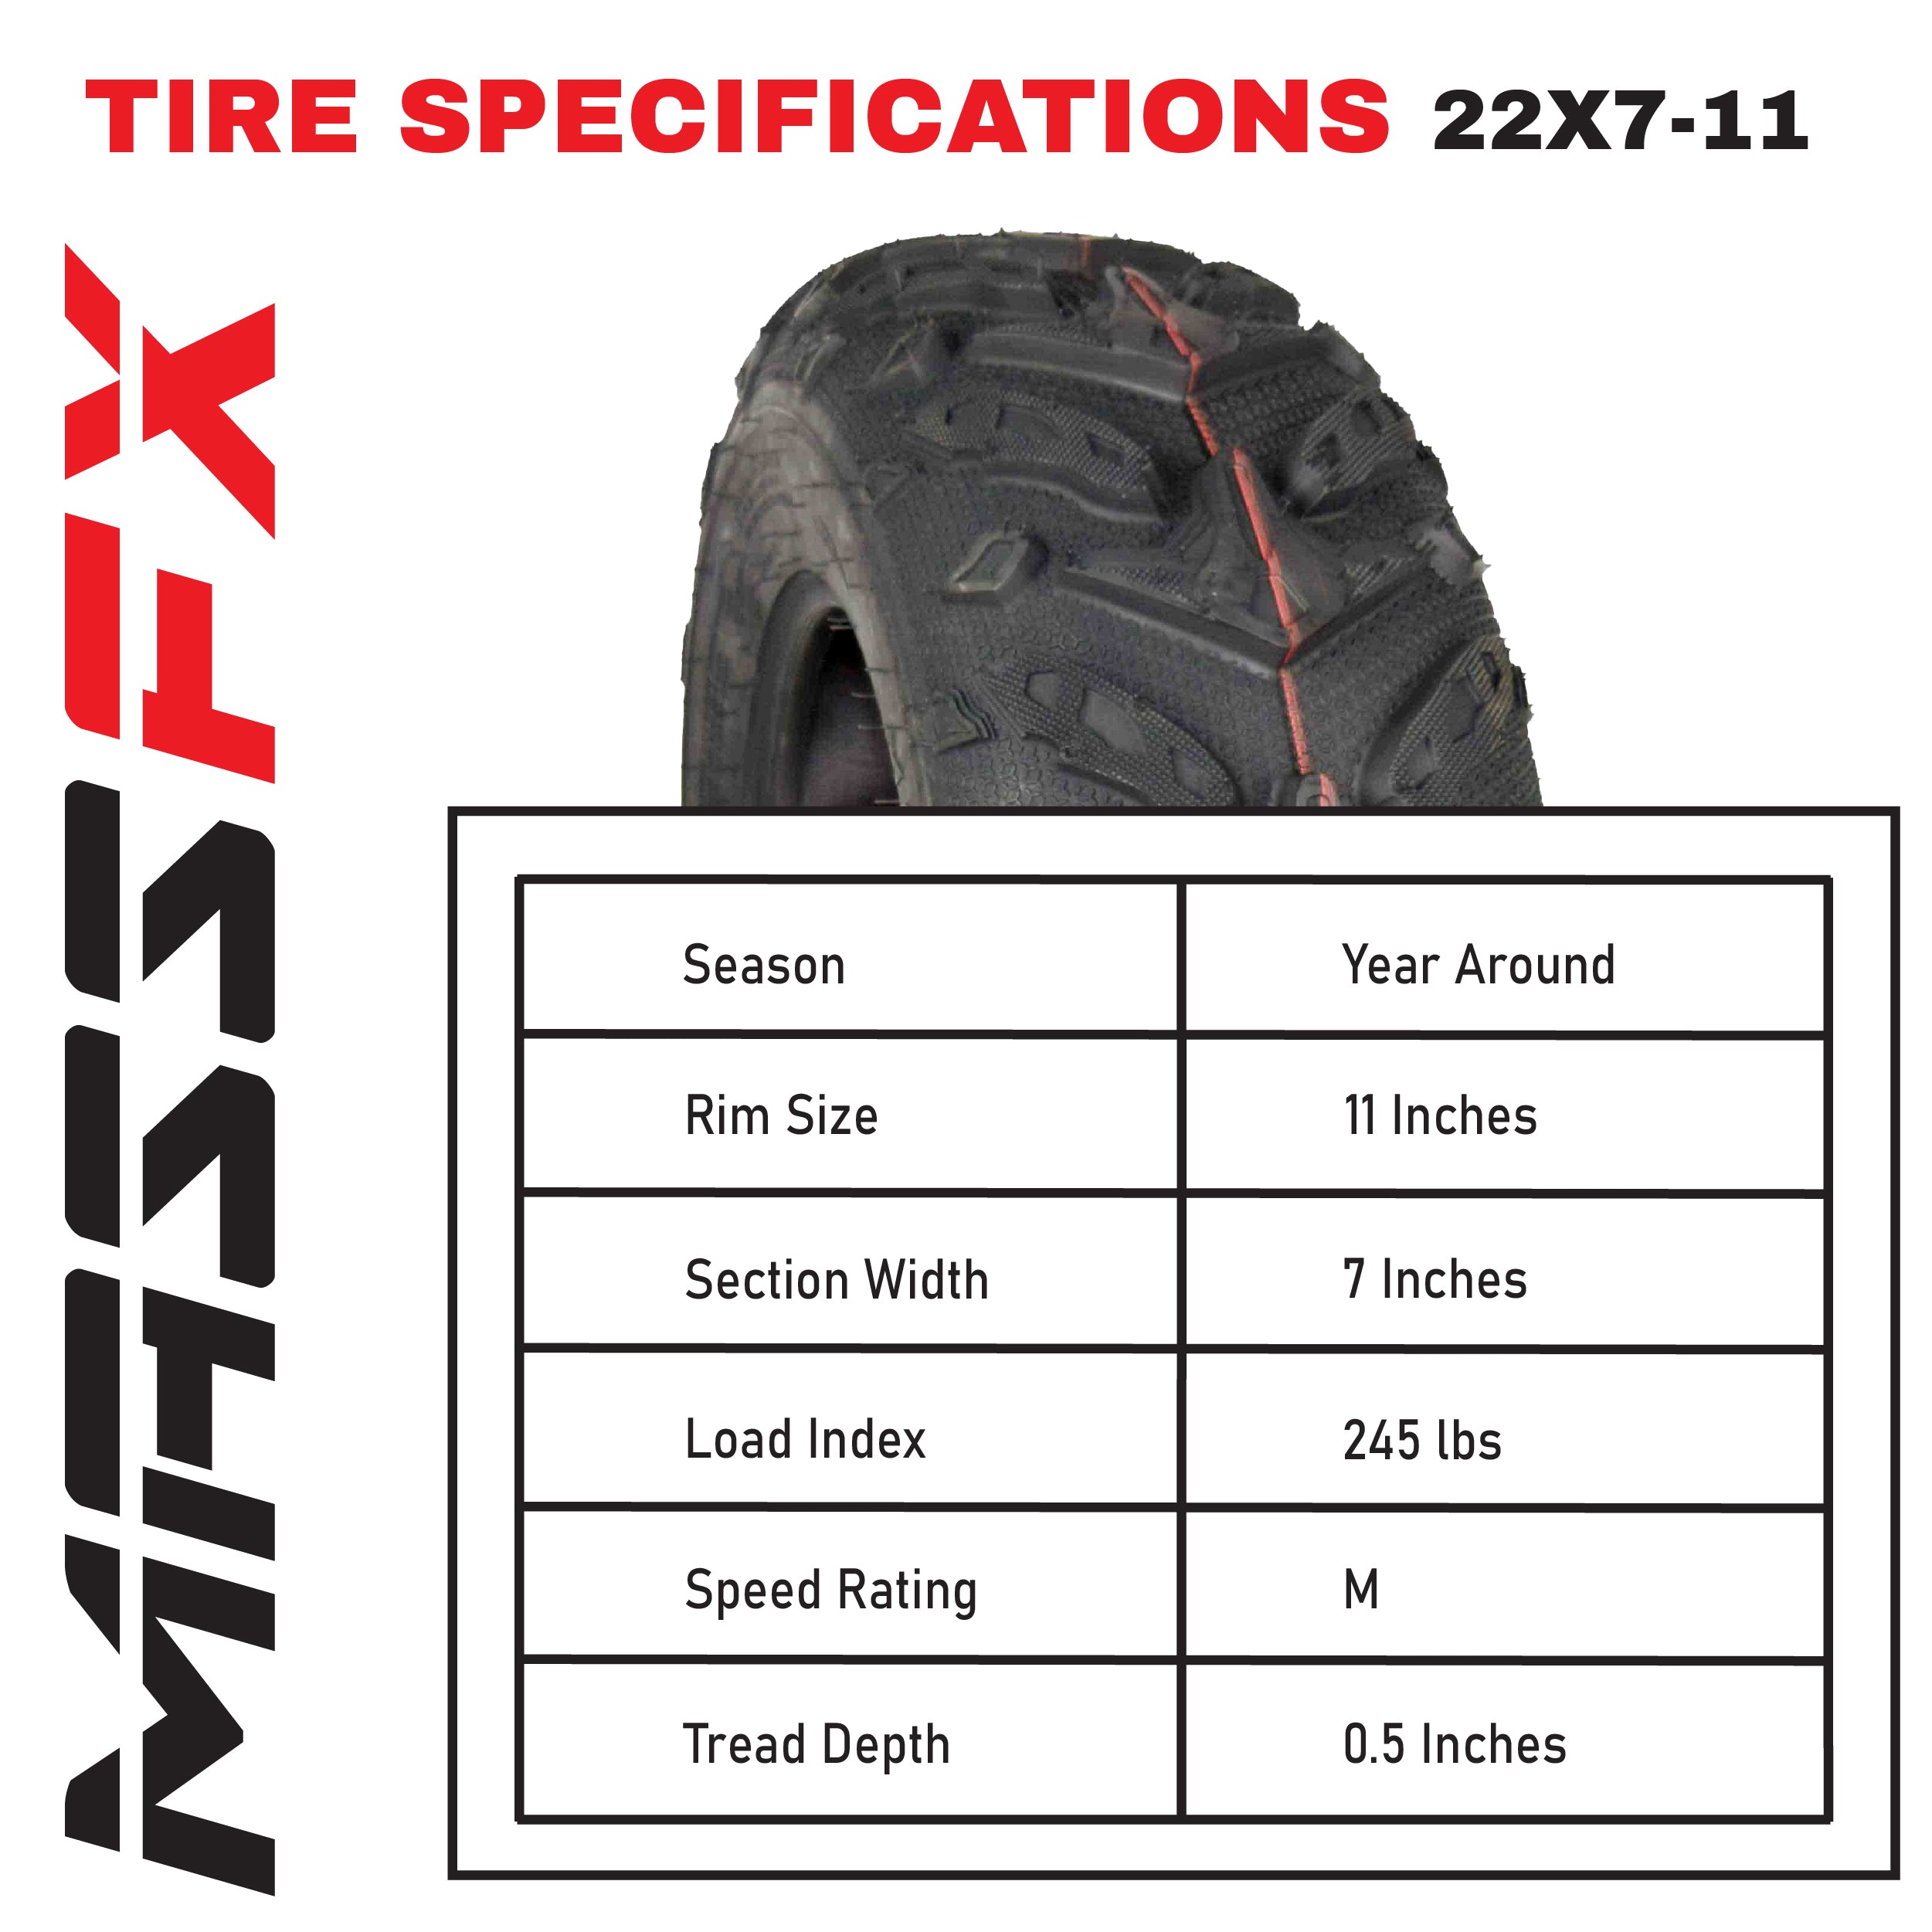 MASSFX Grinder 22x7-11 22x10-9 Front & Rear ATV Tire Set 6 Ply (4 Pack)